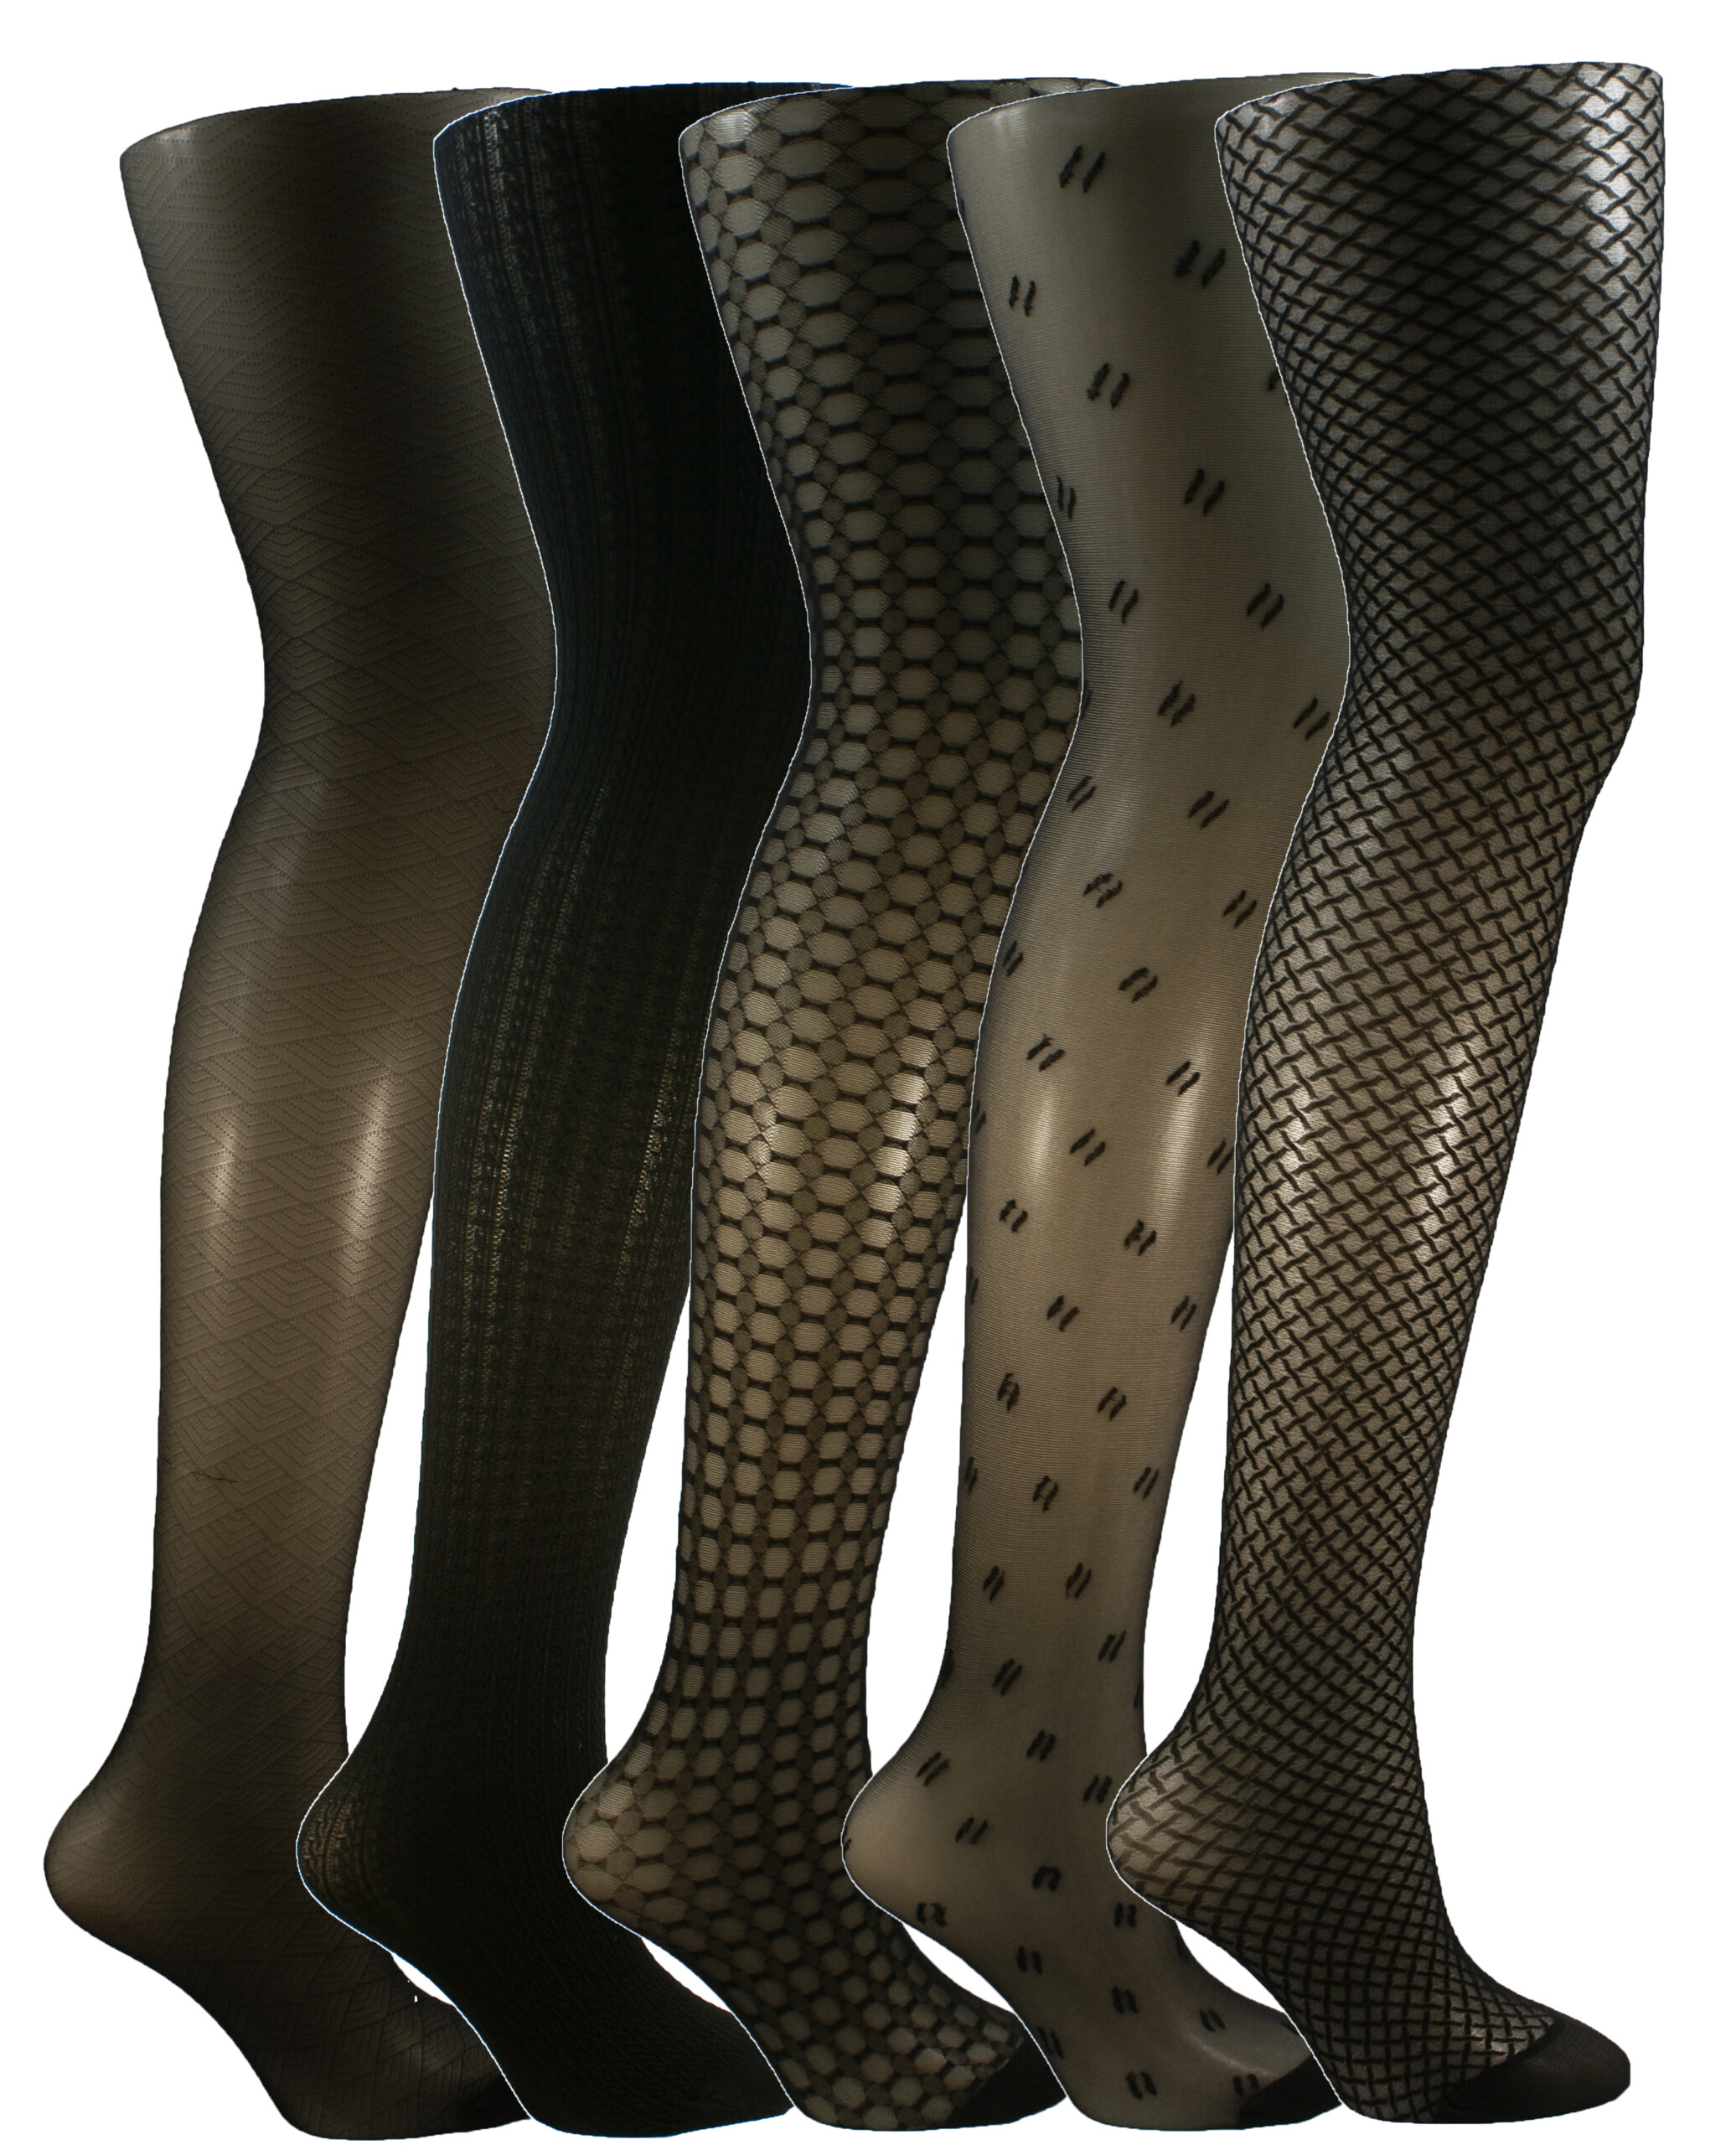 Fashion Tights /Best Women's Patterned Stockings in Australia and New  Zealand